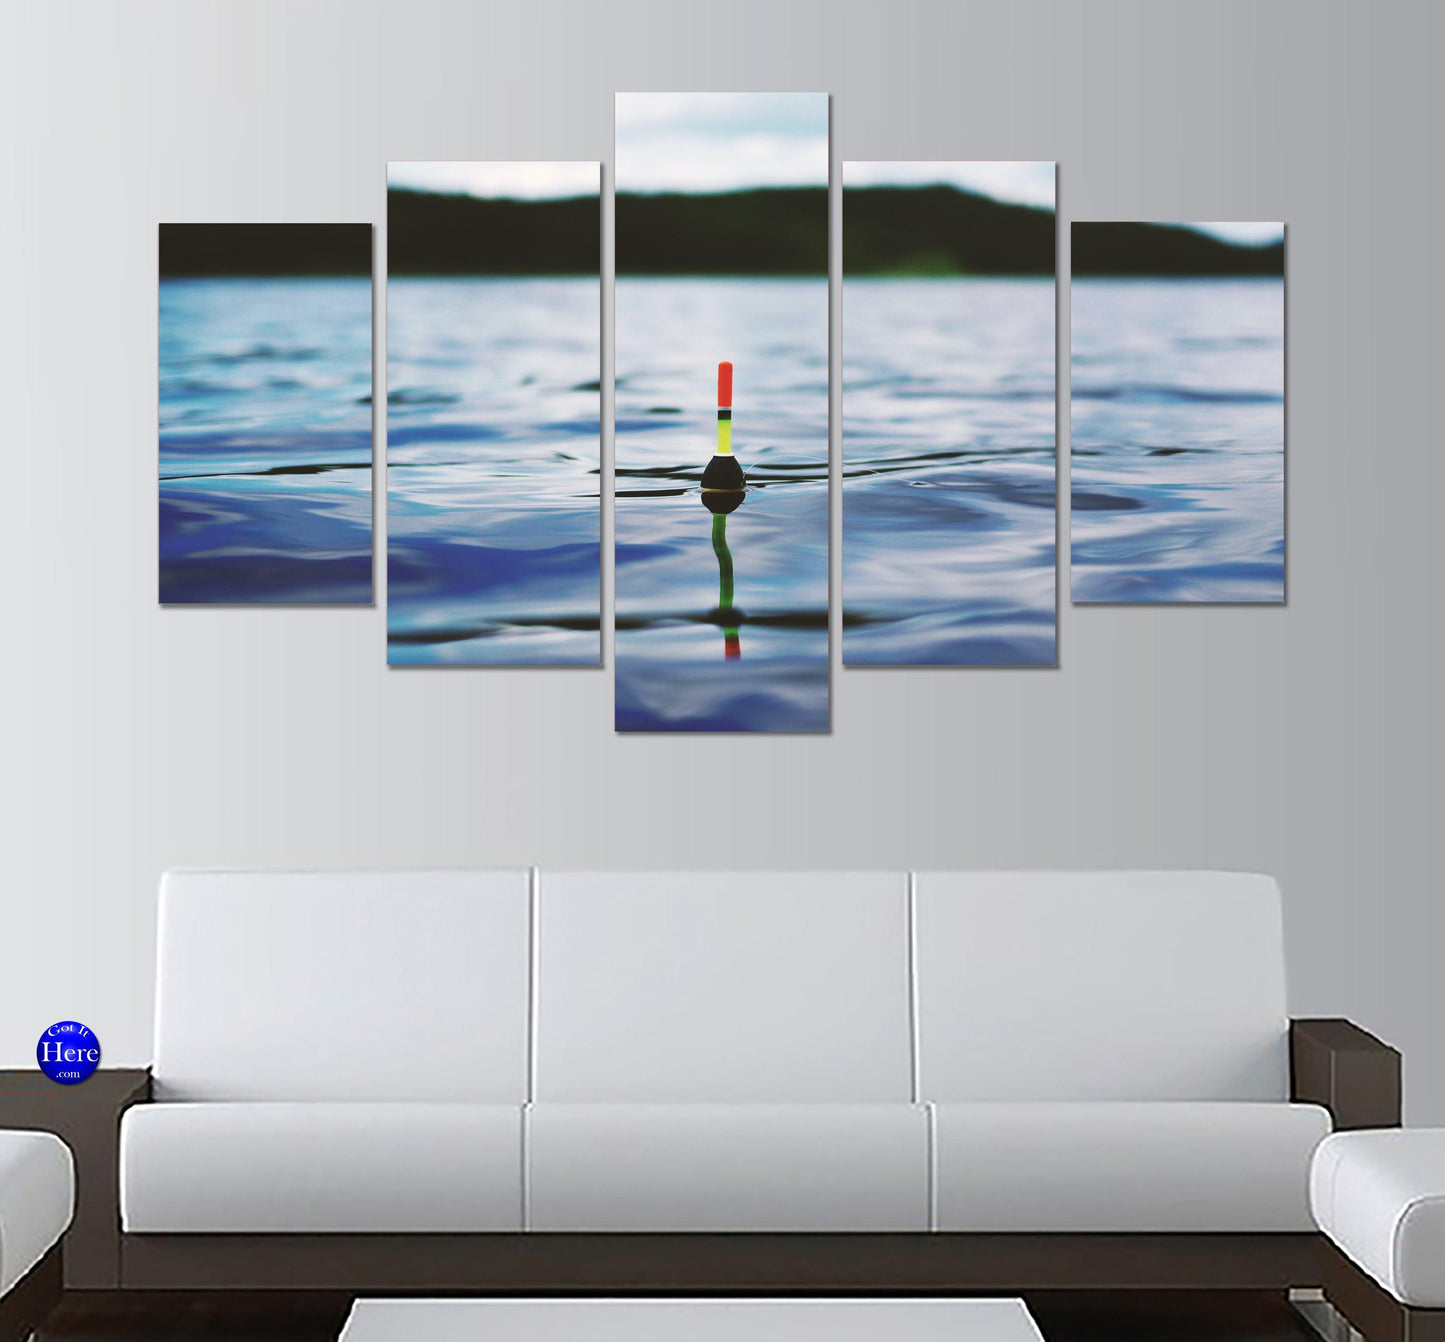 Red Yellow and Black Bobber On Lake At Dawn 5 Panel Canvas Print Wall Art - GotItHere.com